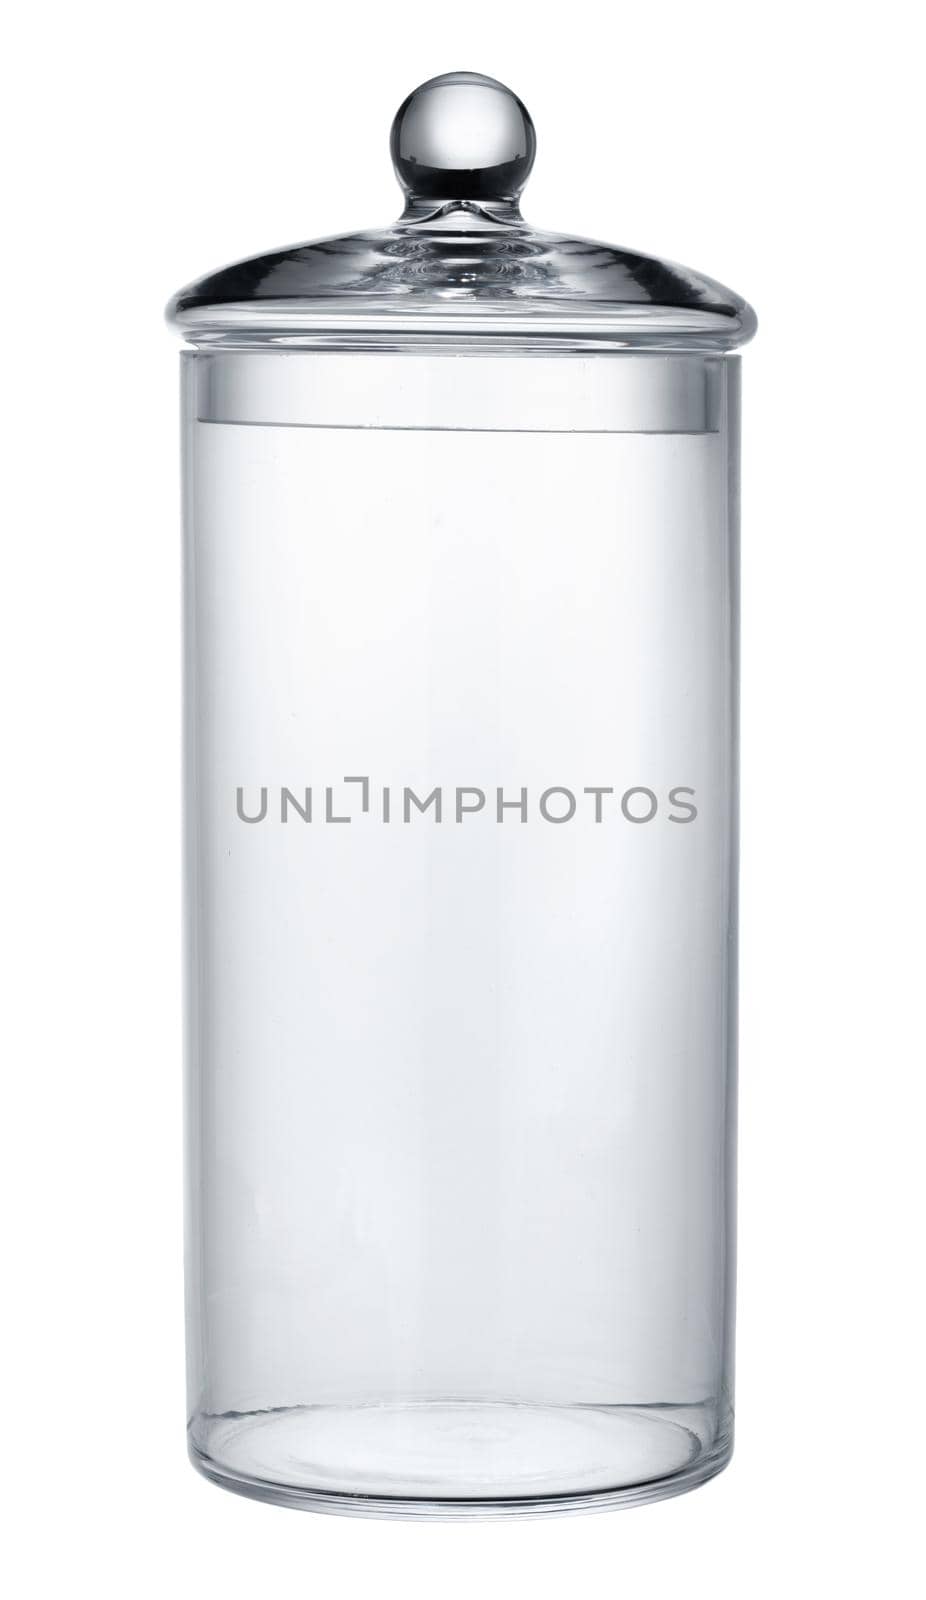 Empty glass storage container isolated on white background close up